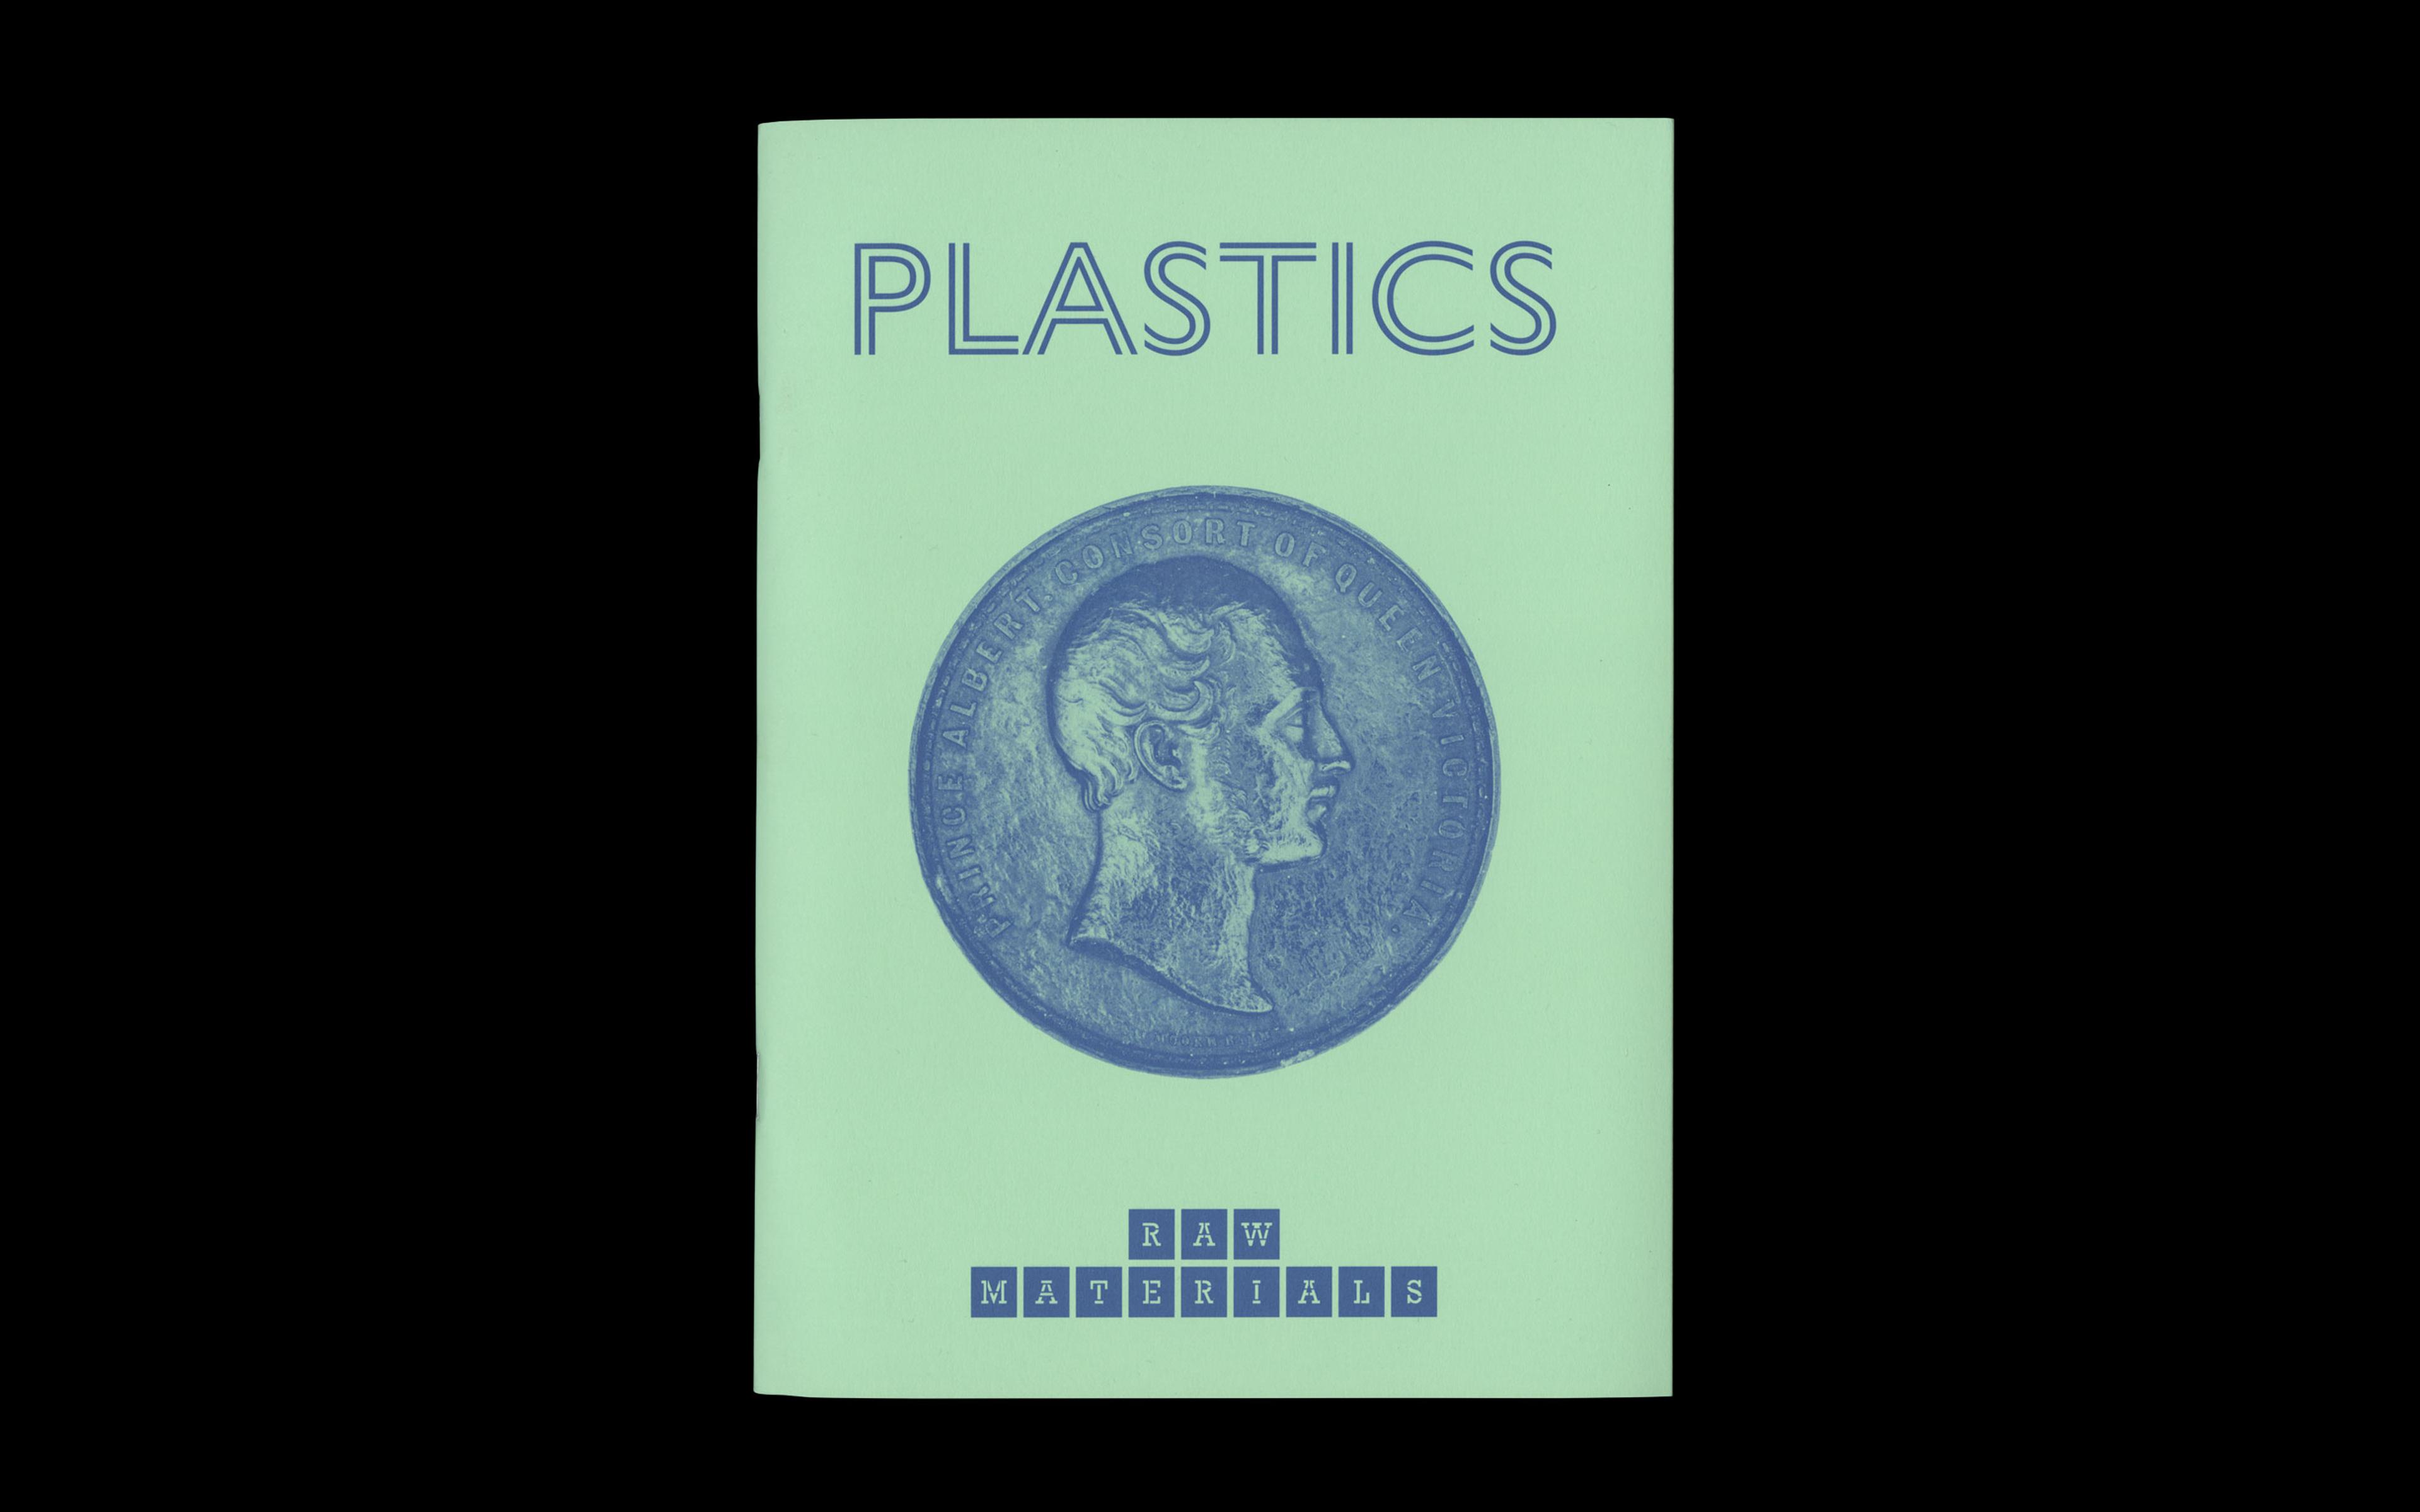 Scanned cover of Plastics publication